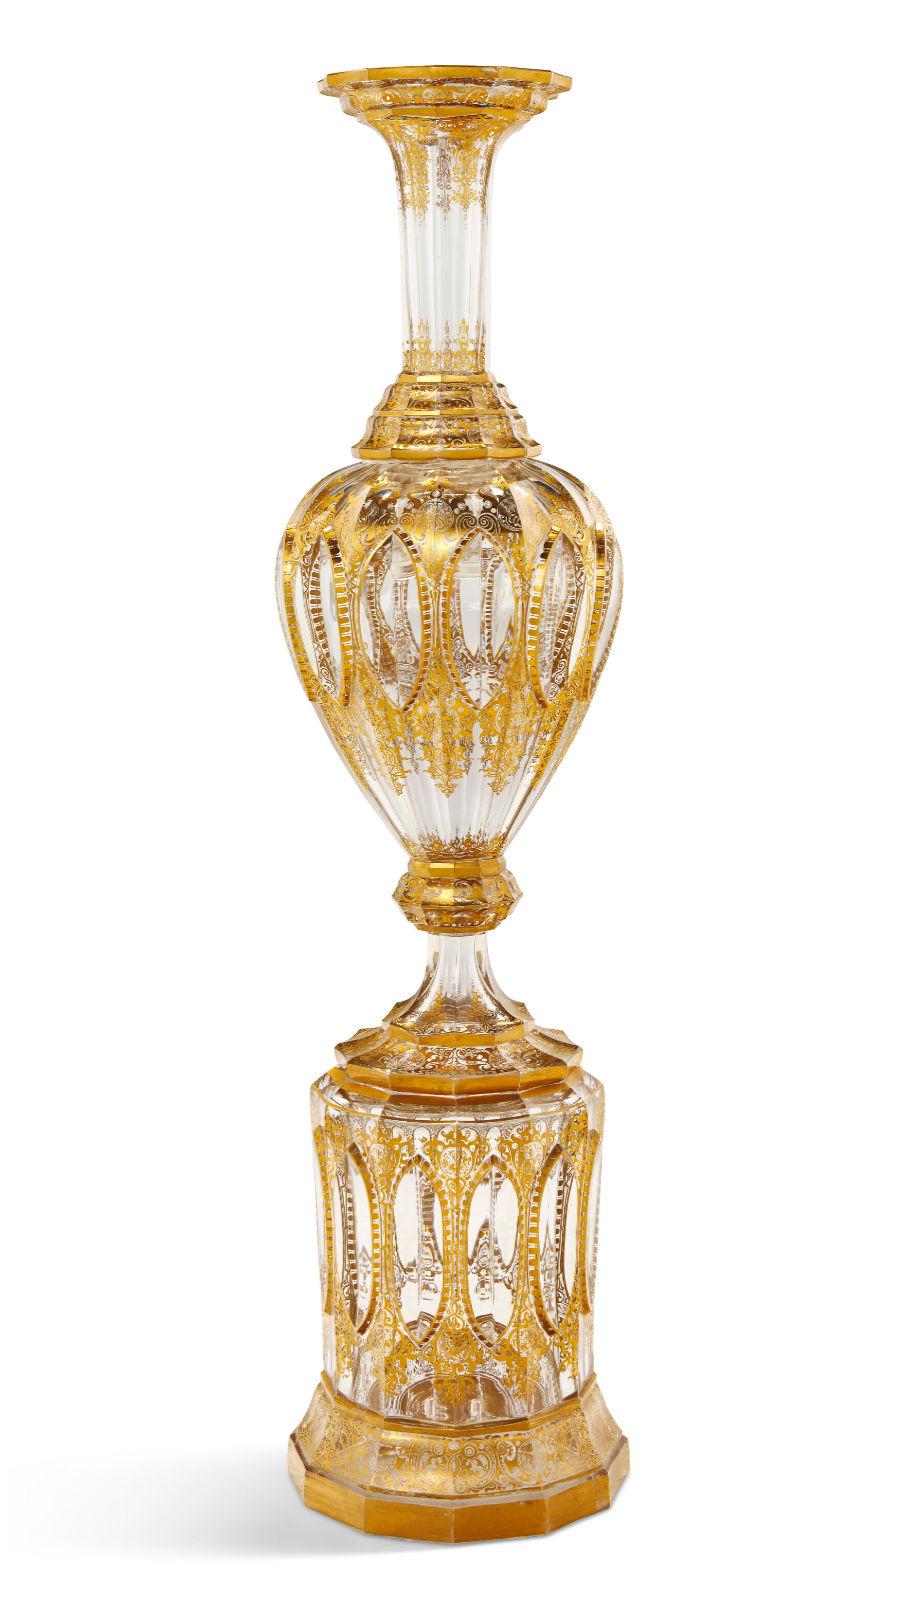 Monumental Antique Bohemian Gilt Glass Vase In Good Condition For Sale In New York, US